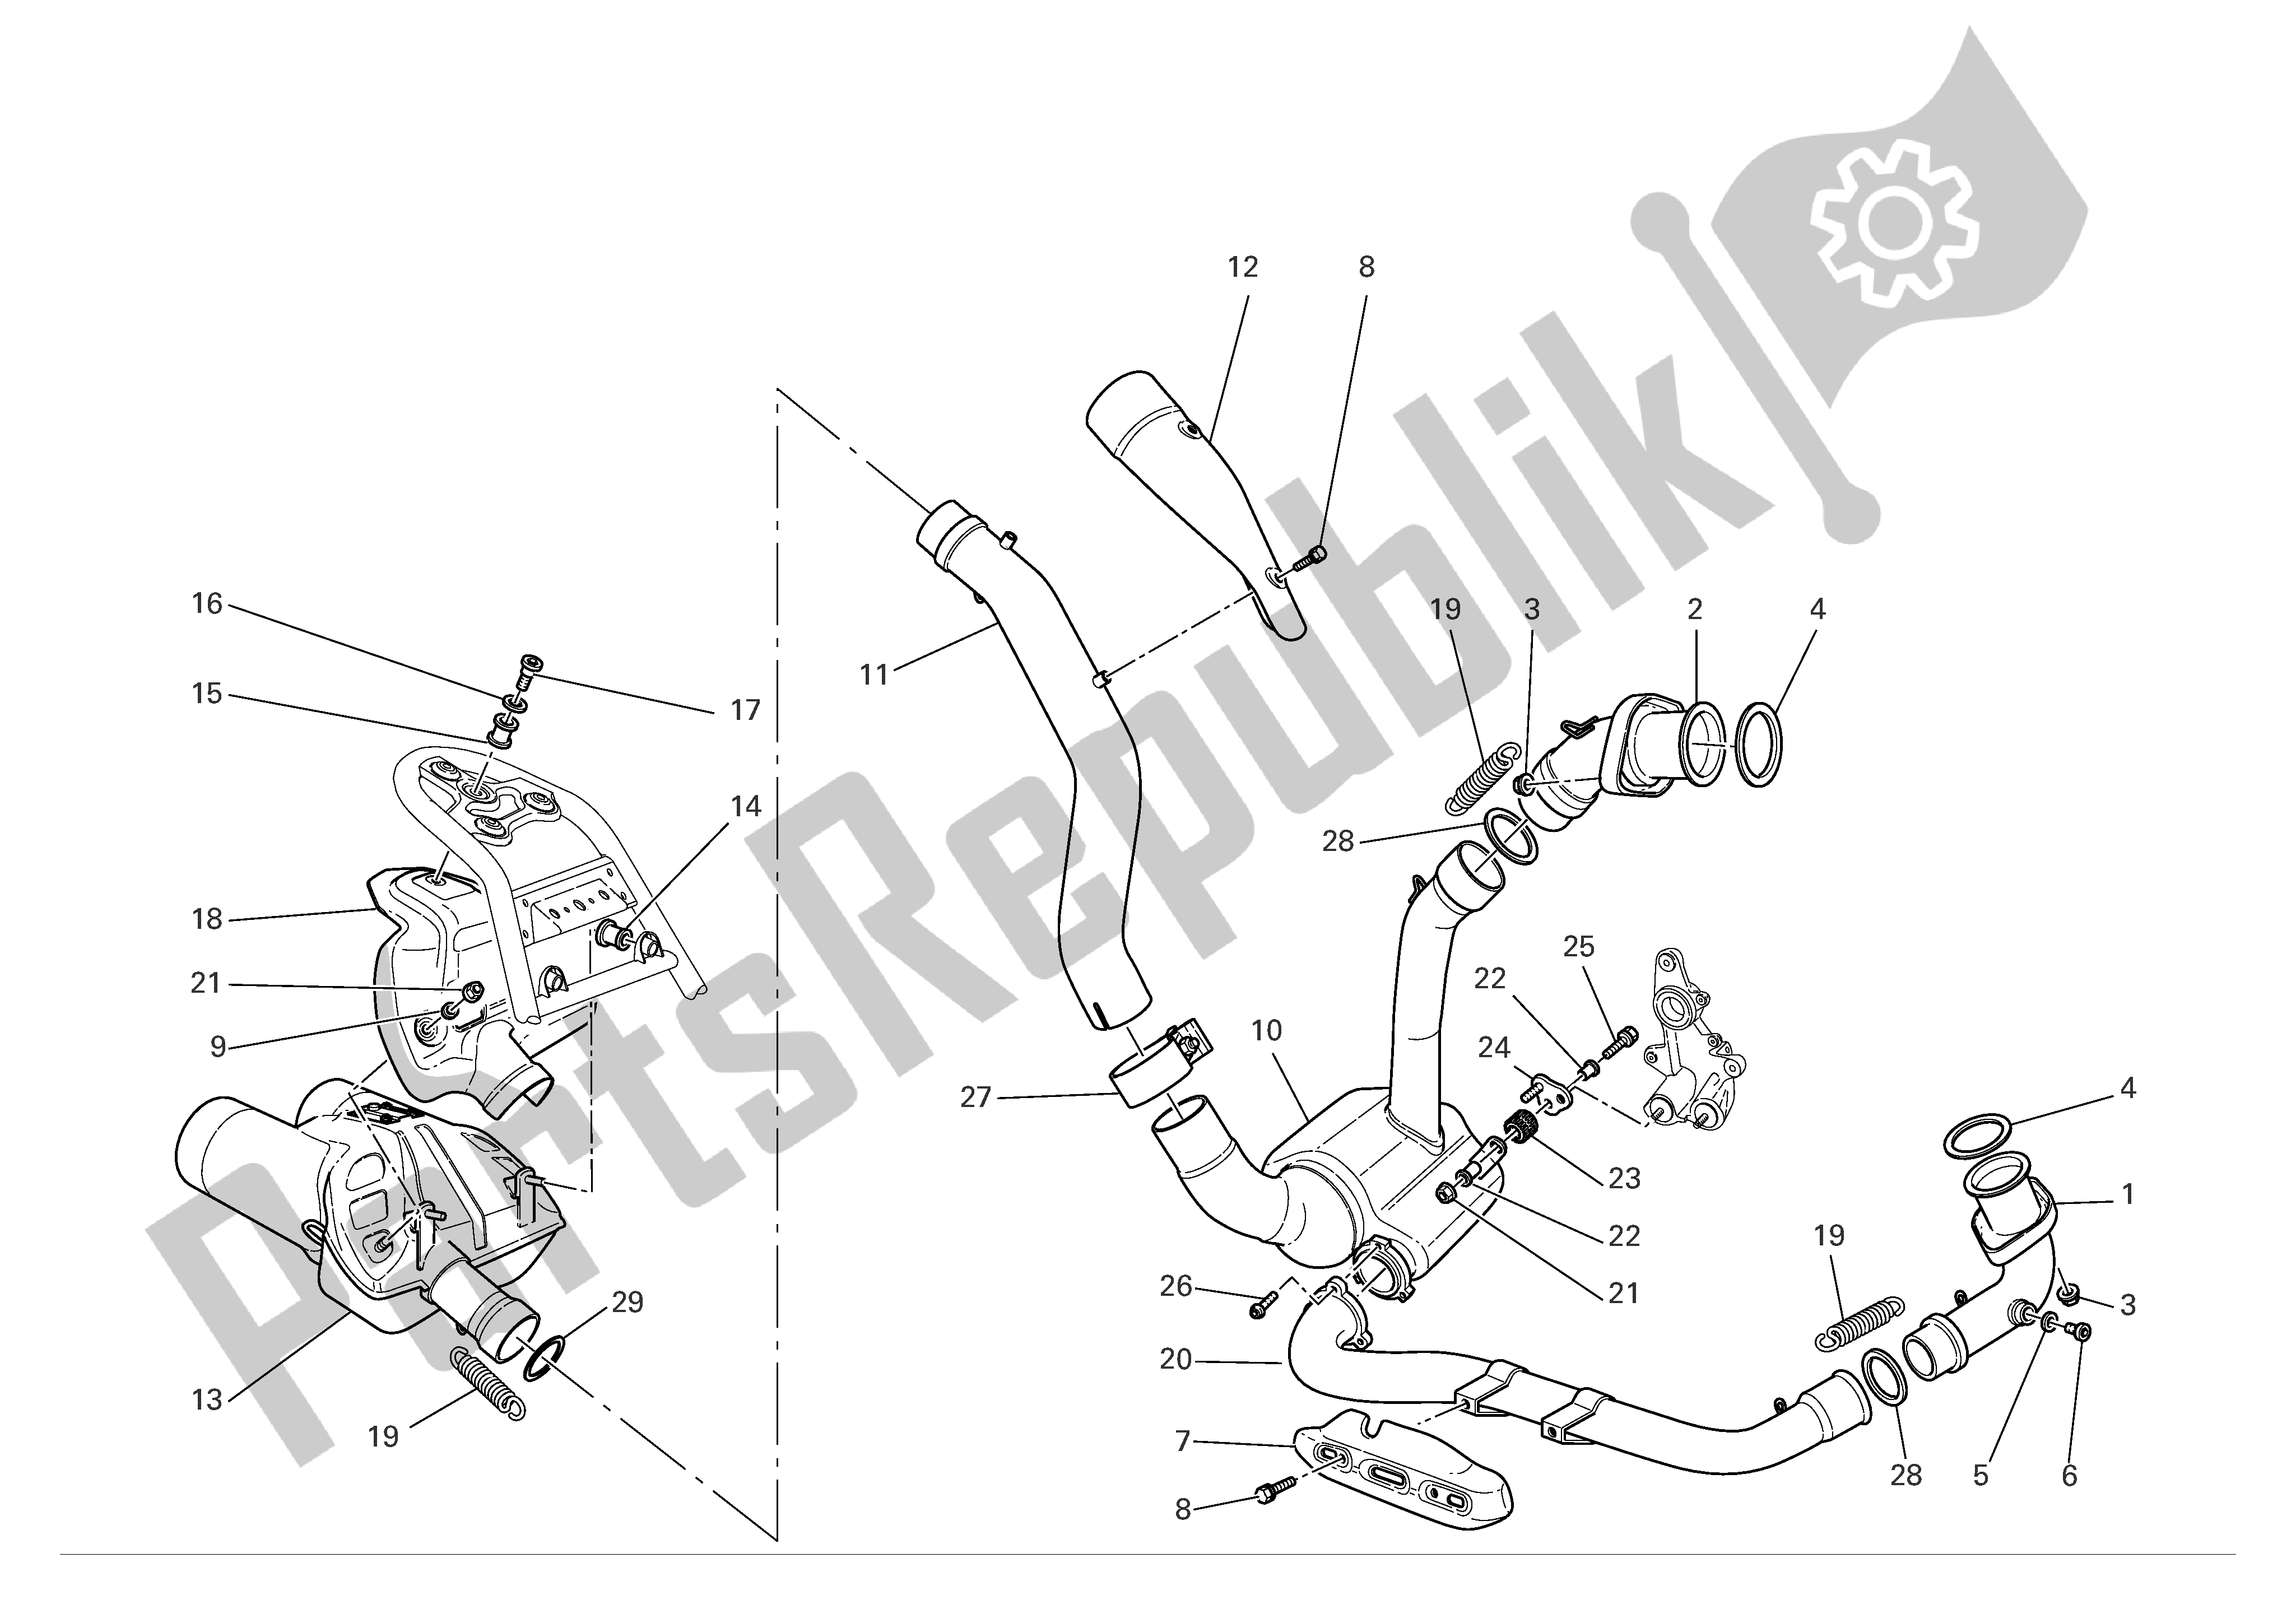 All parts for the Exhaust System of the Ducati Multistrada 1000 2004